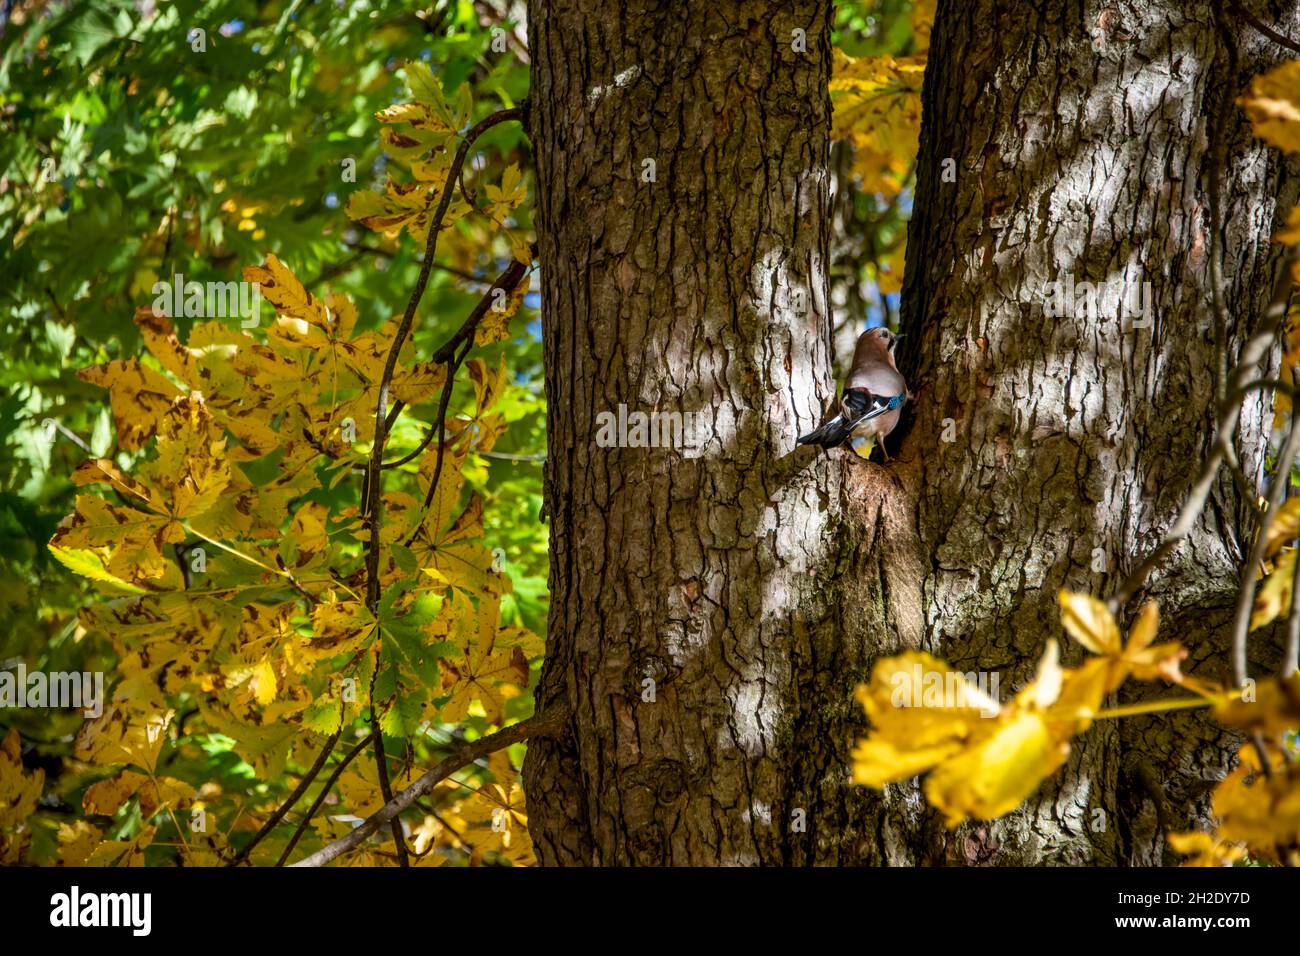 Jay garrulus in central Europe in the park on an autumn day Stock Photo